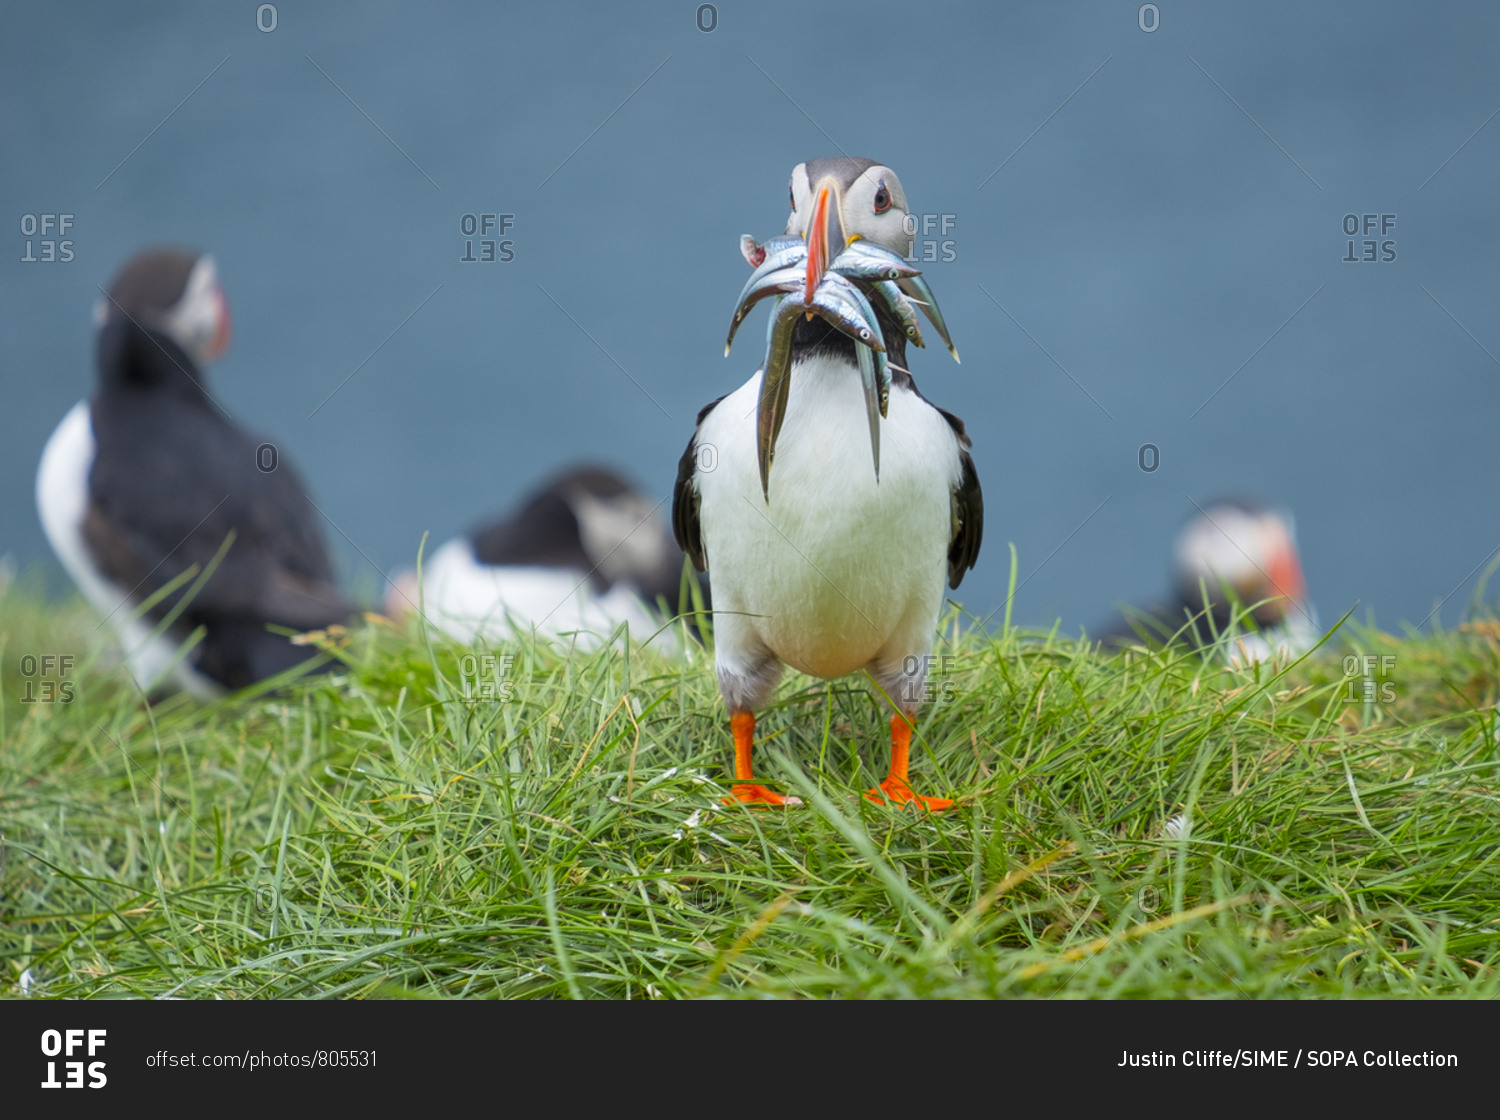 Iceland, West Iceland, Vesturland, An Atlantic Puffin with a mouthful of sand eels, on Grimsey Island in the Westfjords or West Fjords of Iceland